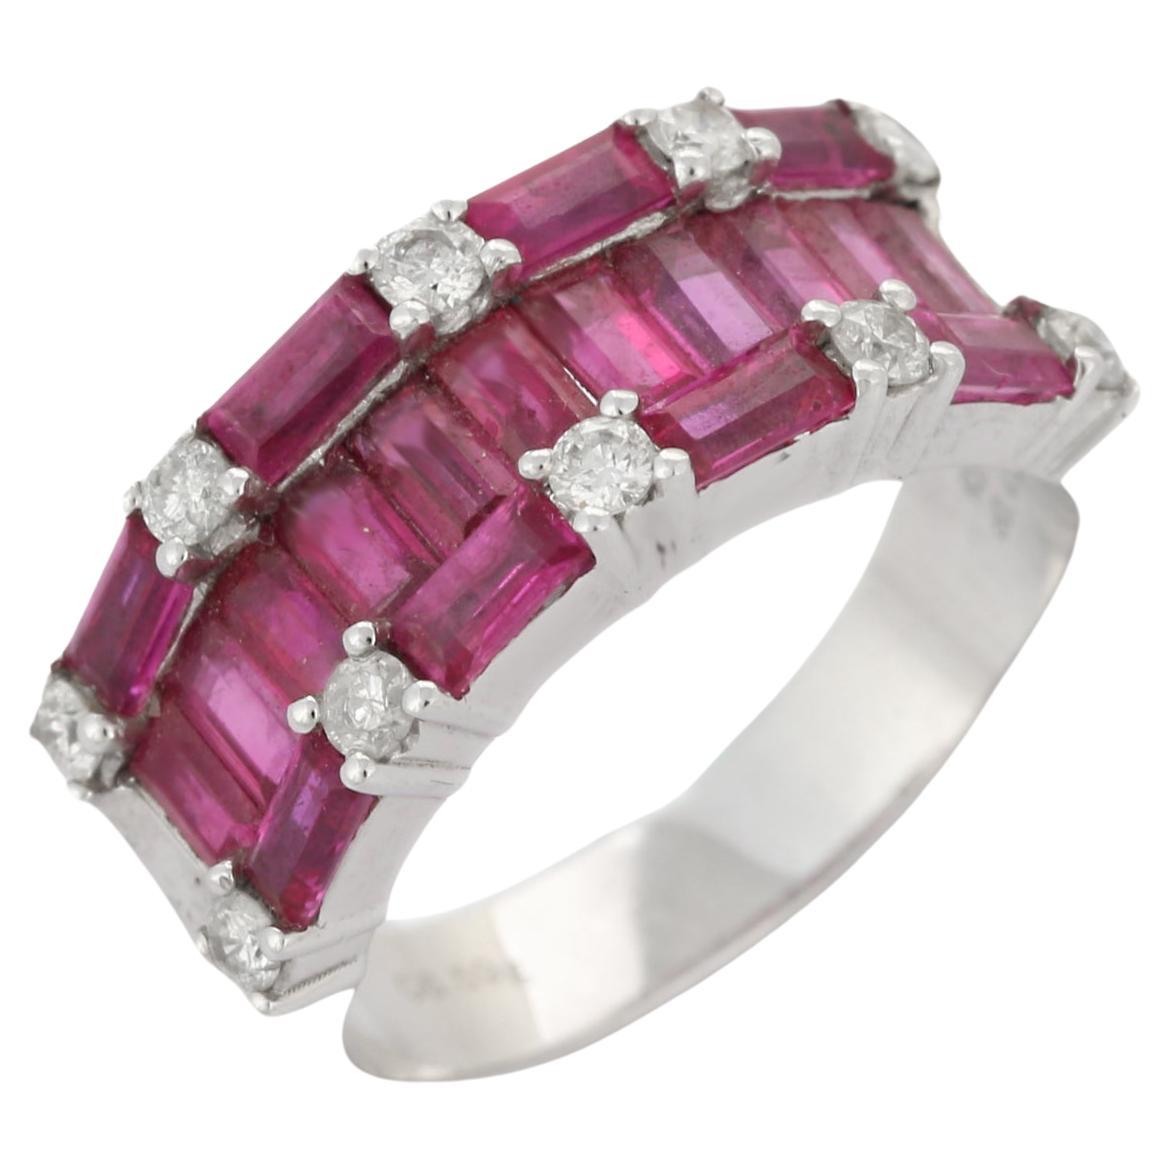 14K White Gold 3.19 Ct Ruby Baguettes Cluster Wedding Band Ring with Diamond